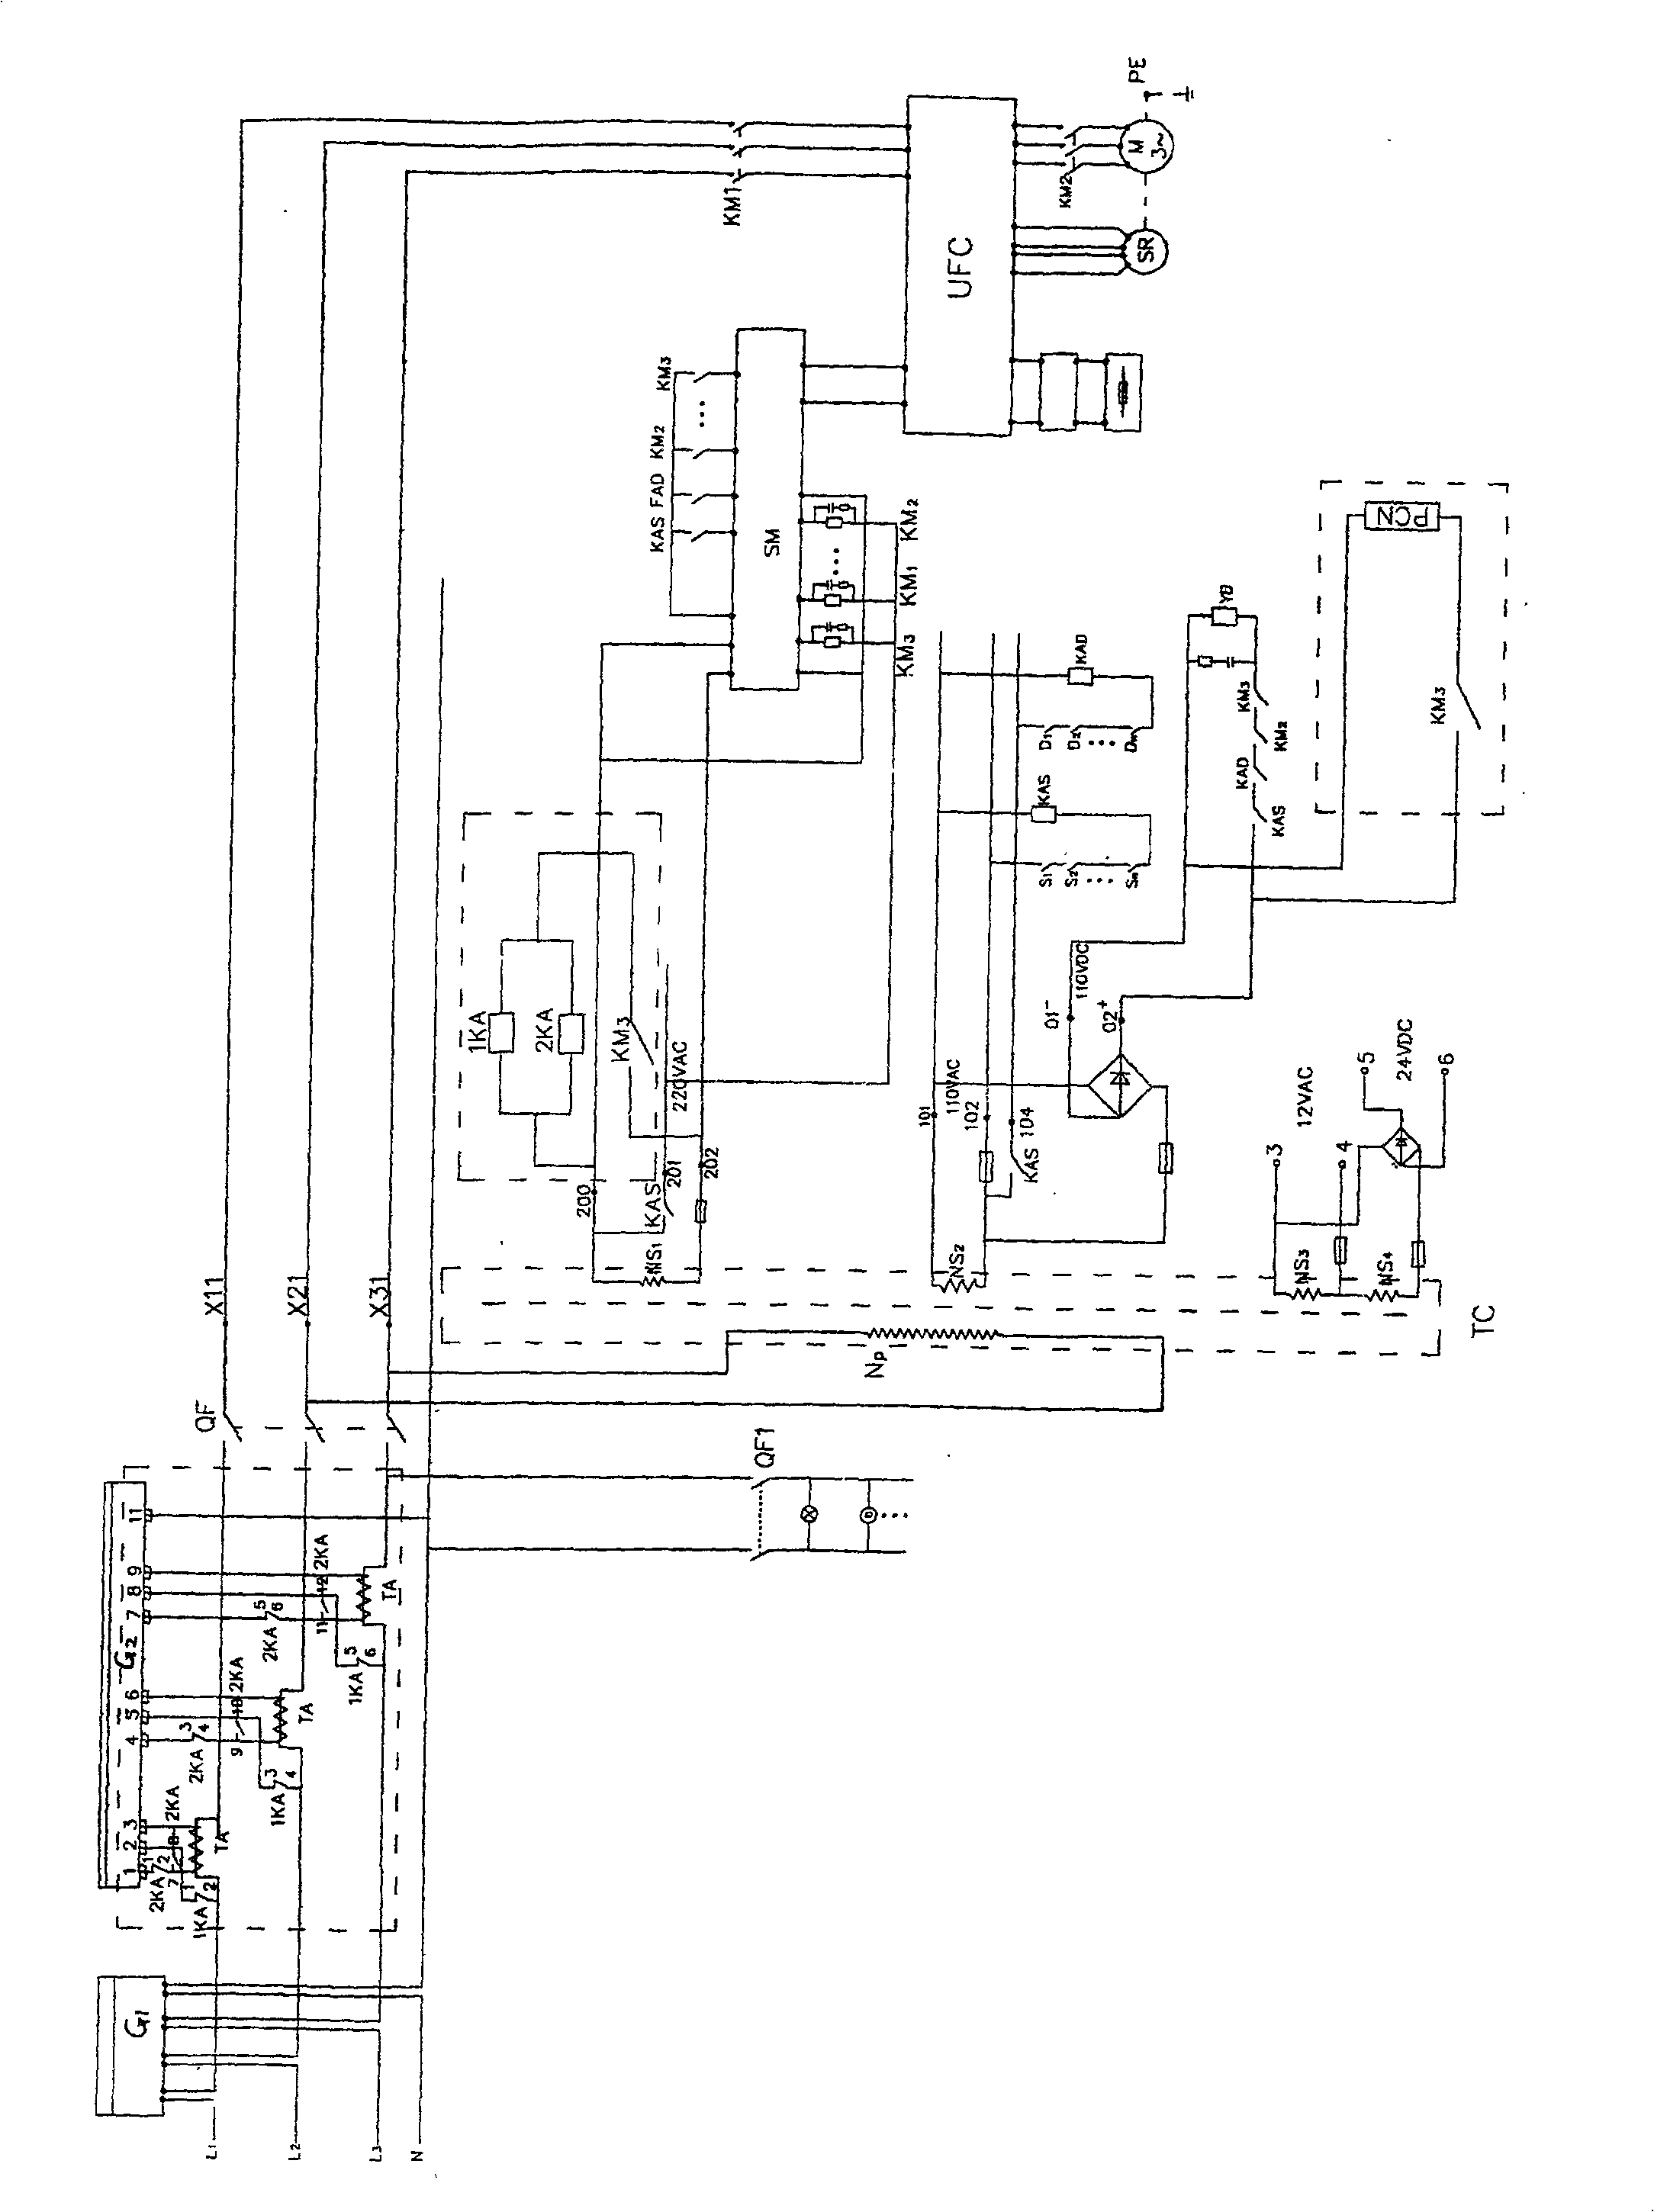 Electricity degree metering mechanism used for electric charge shareing for building elevator